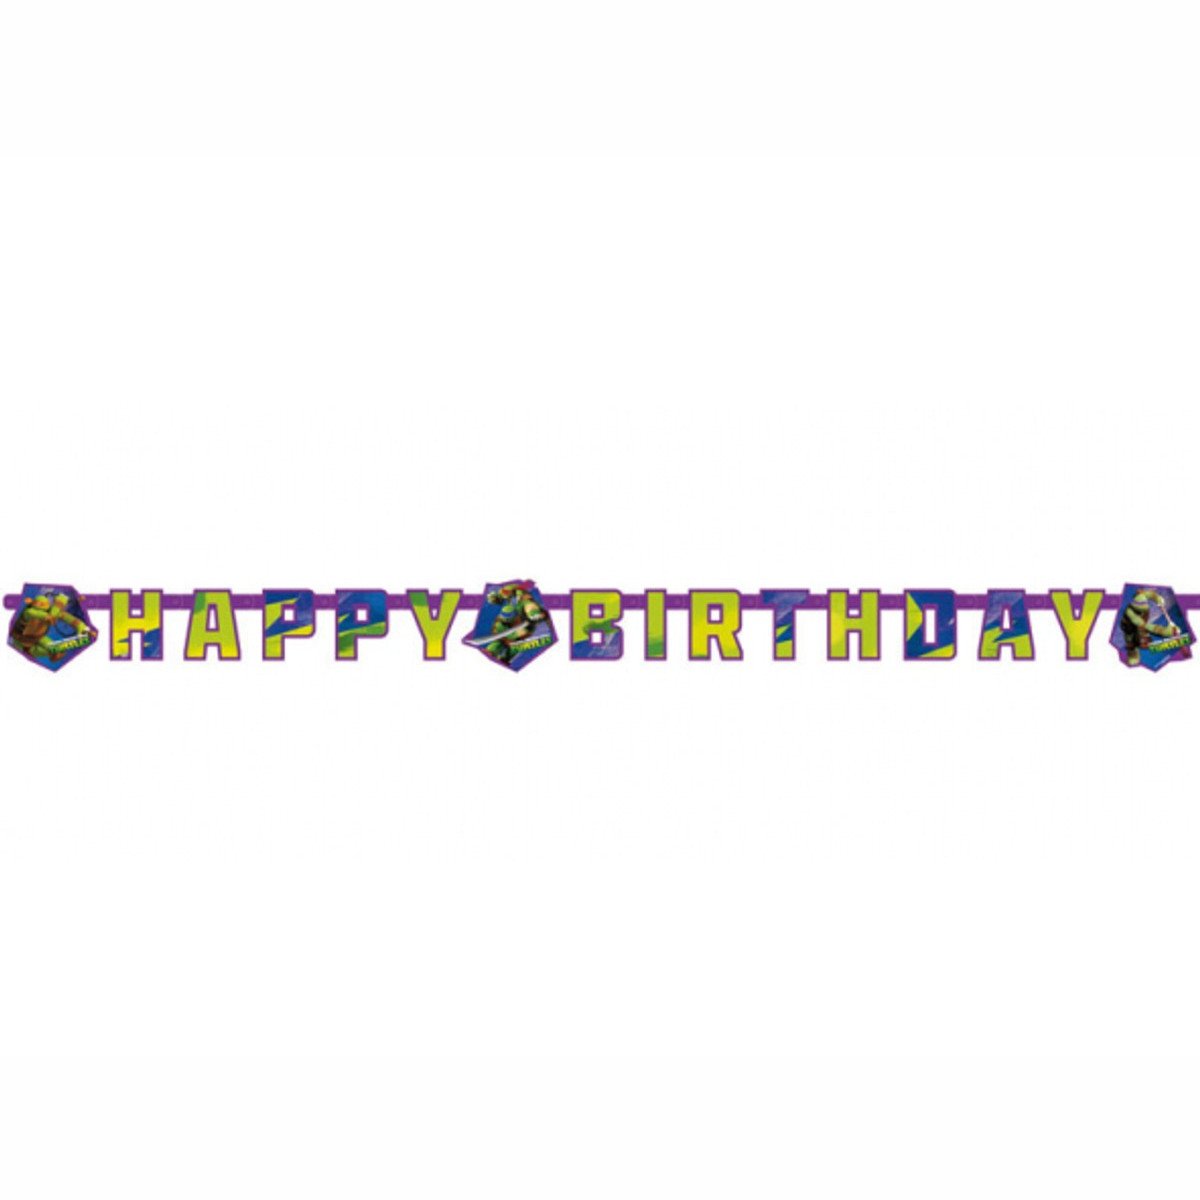 Teenage Mutant Ninja Turtles Birthday Banner Decorations - Party Centre - Party Centre